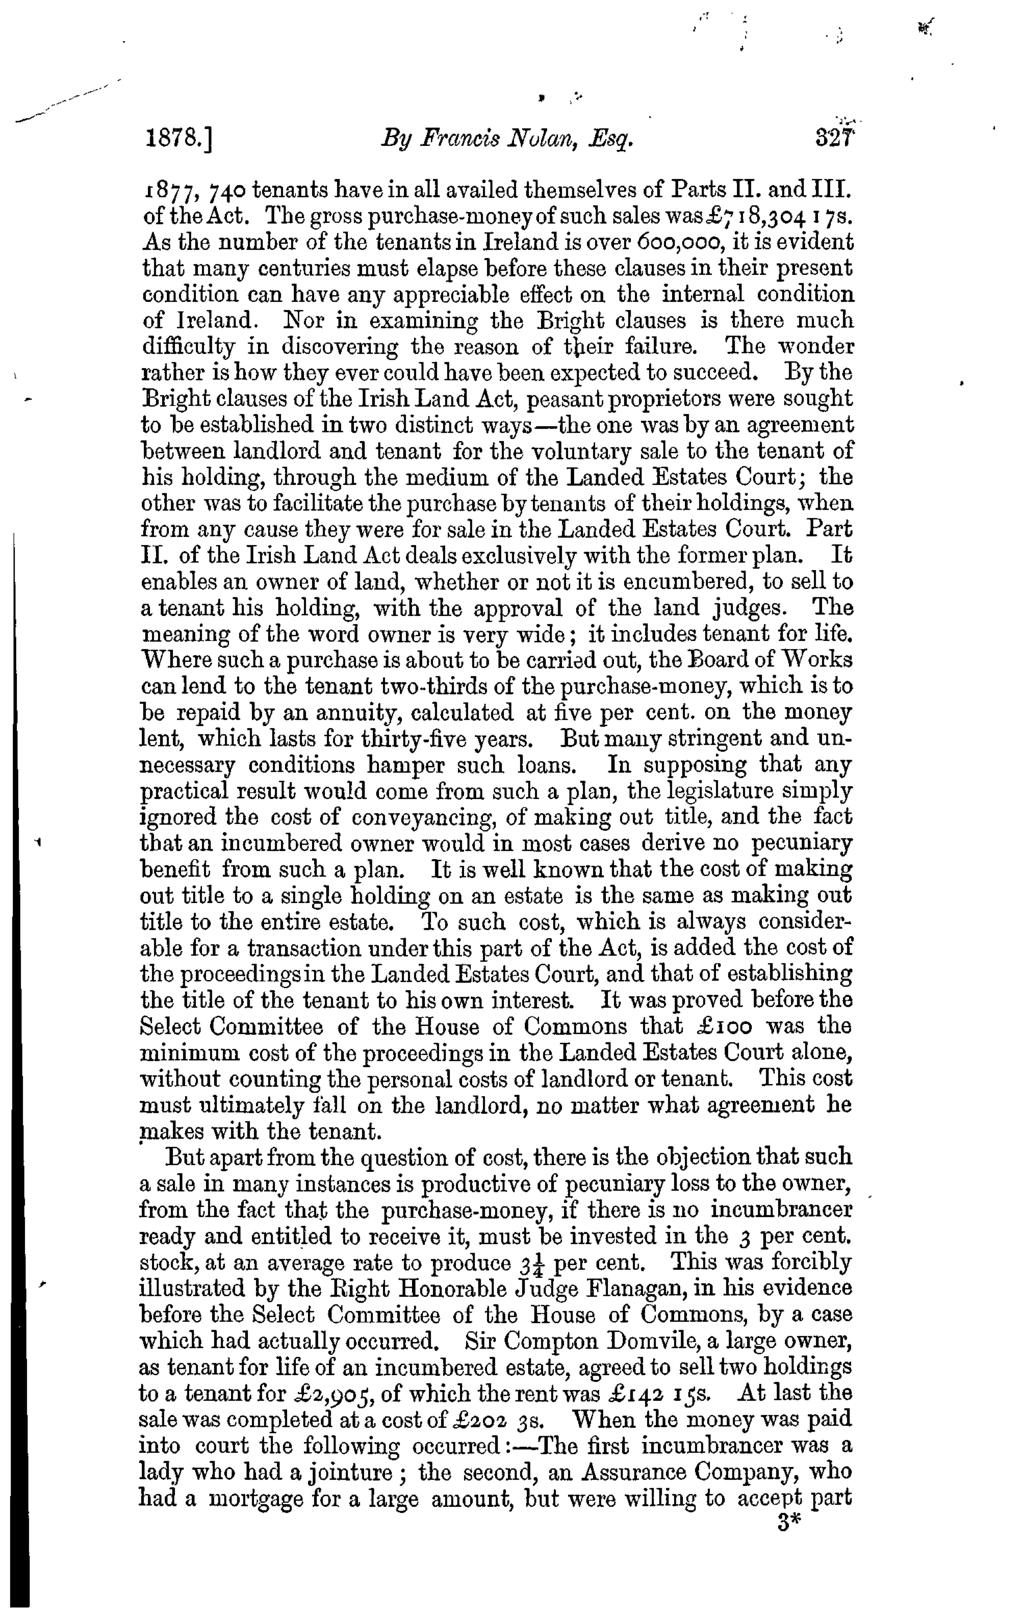 1878.] By Francis Nolan, Esq. 3'2T : 1877, 740 tenants have in all availed themselves of Parts II. and III. of the Act. The gross purchase-money of such sales was 718,304 17s.